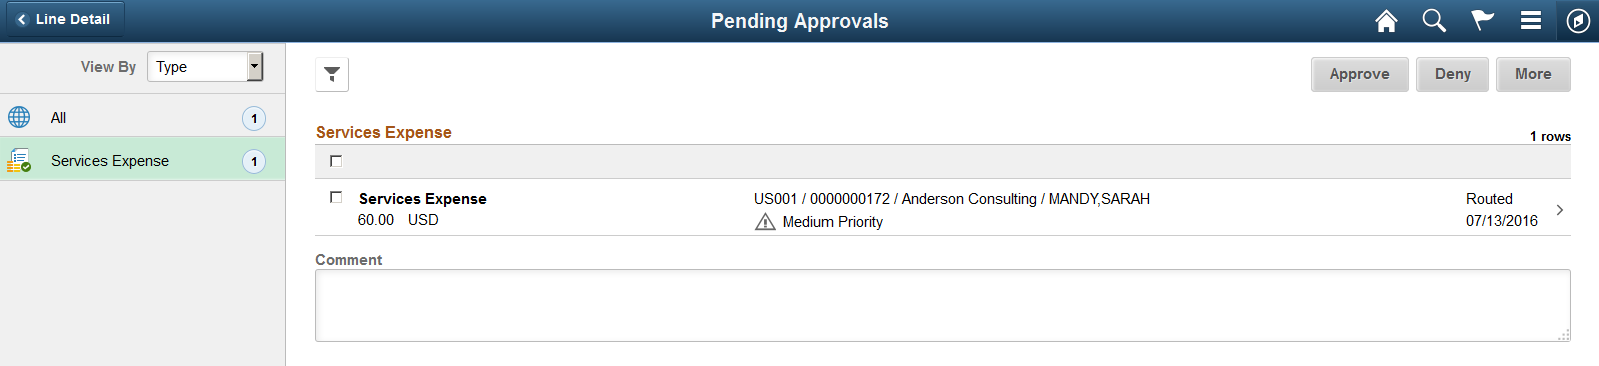 Pending Approvals - Services Expense list page